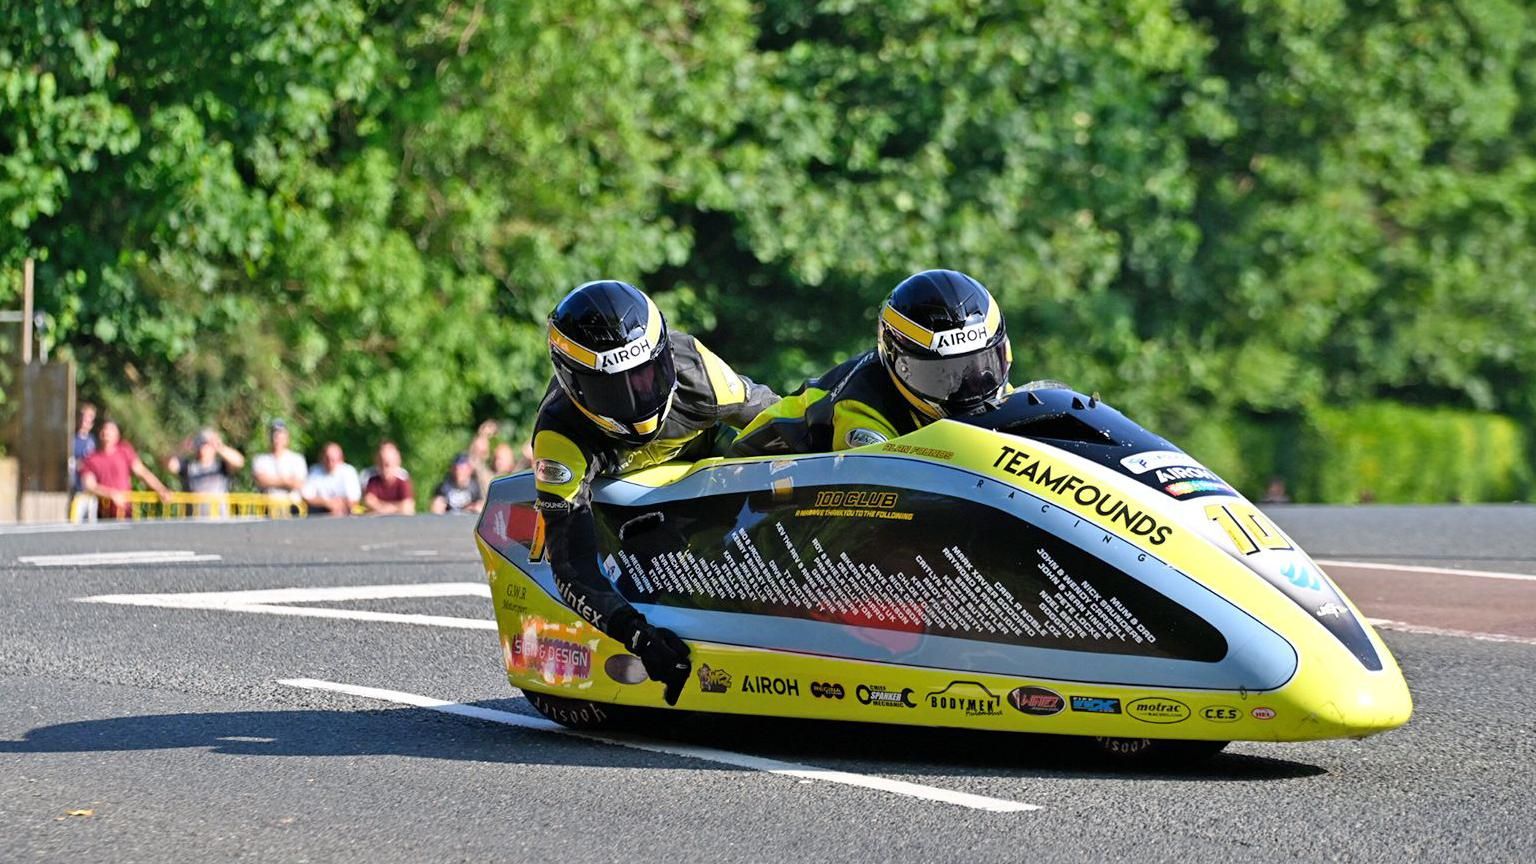 Alan Founds and Rhys Gibbons sidecar outfit